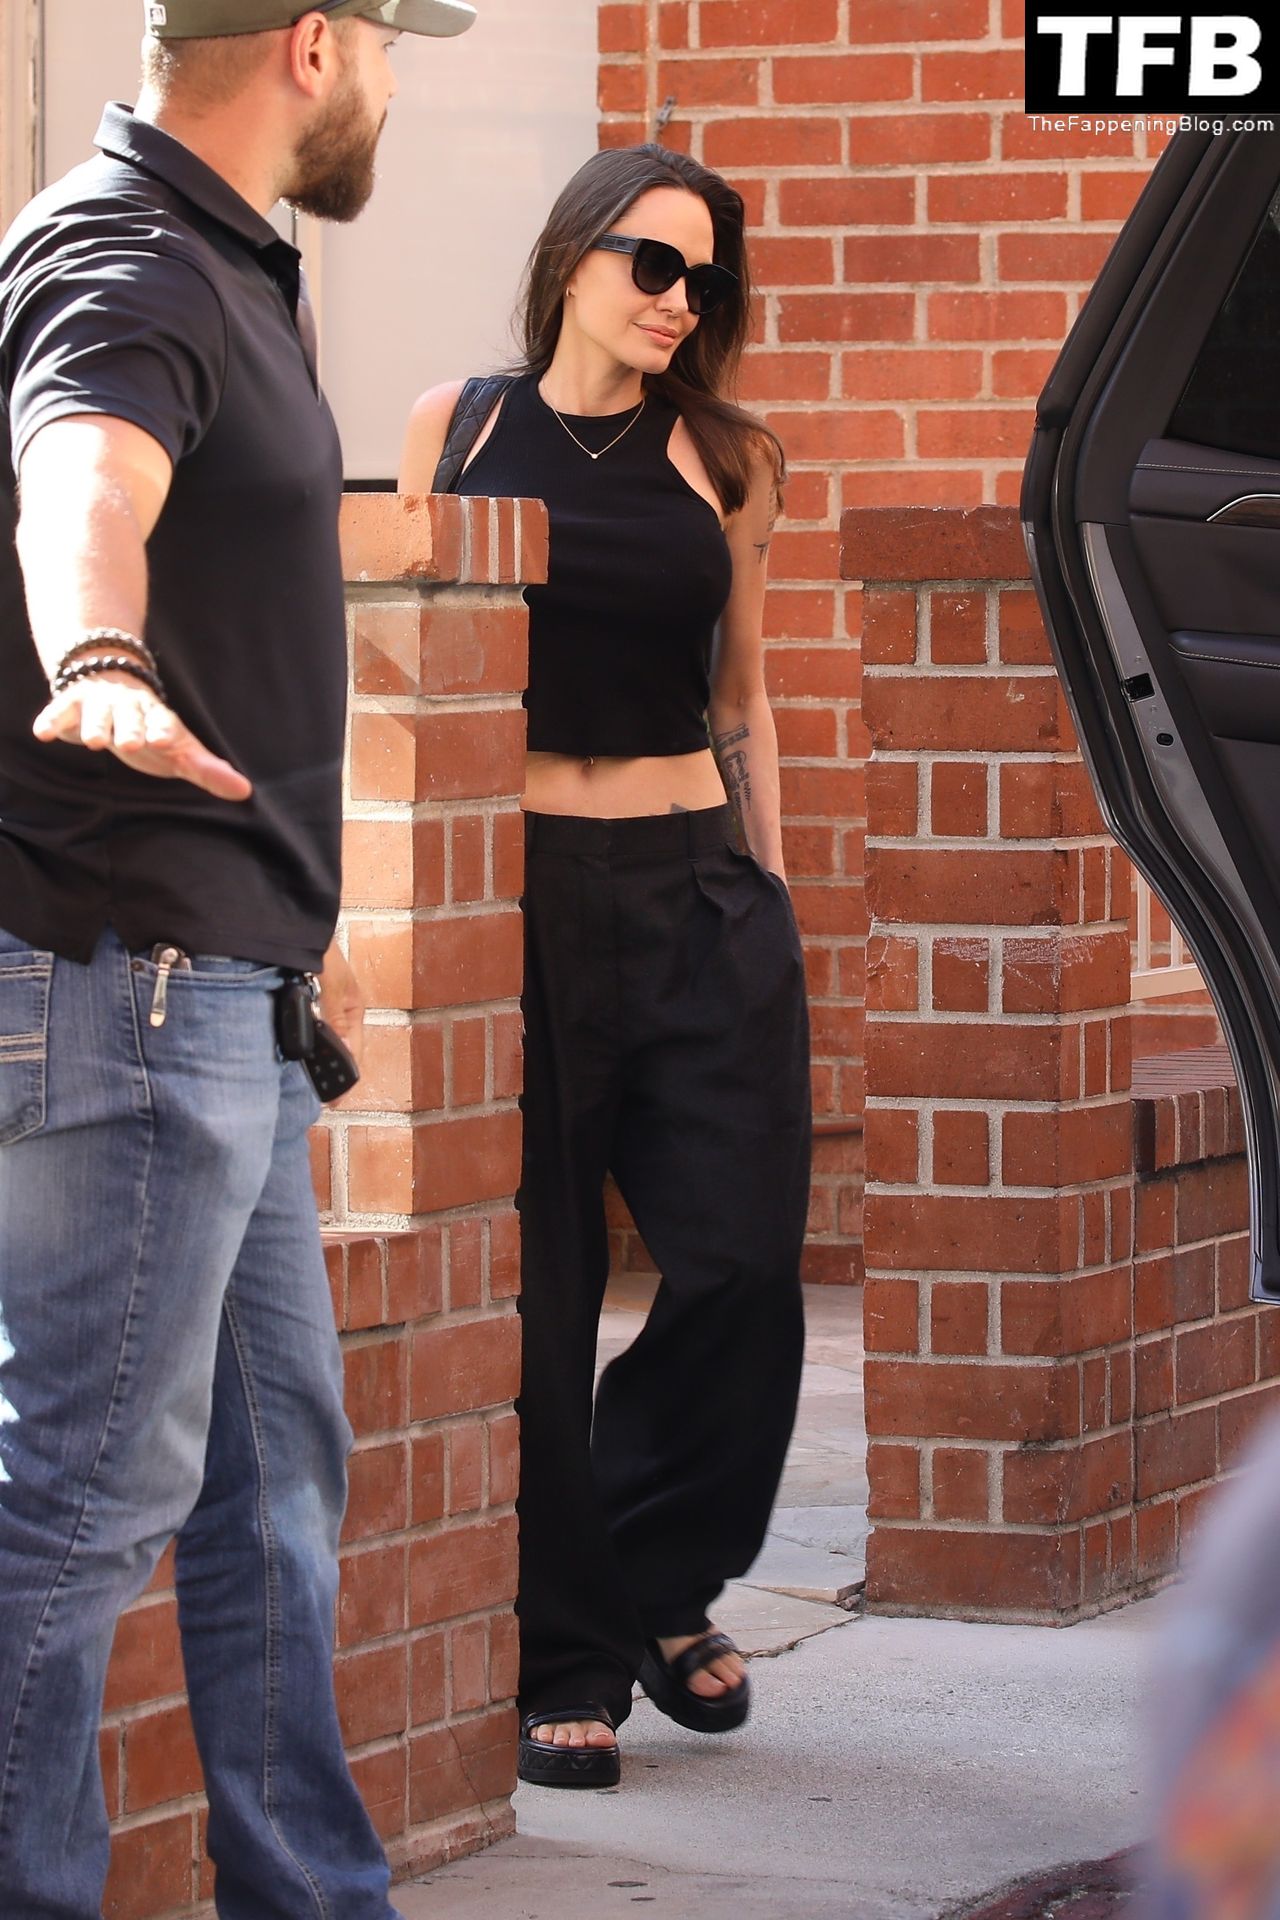 Angelina Jolie Braless The Fappening Blog 12 - Angelina Jolie Shows Off Her Tight Tummy Leaving an Office Building (33 Photos)